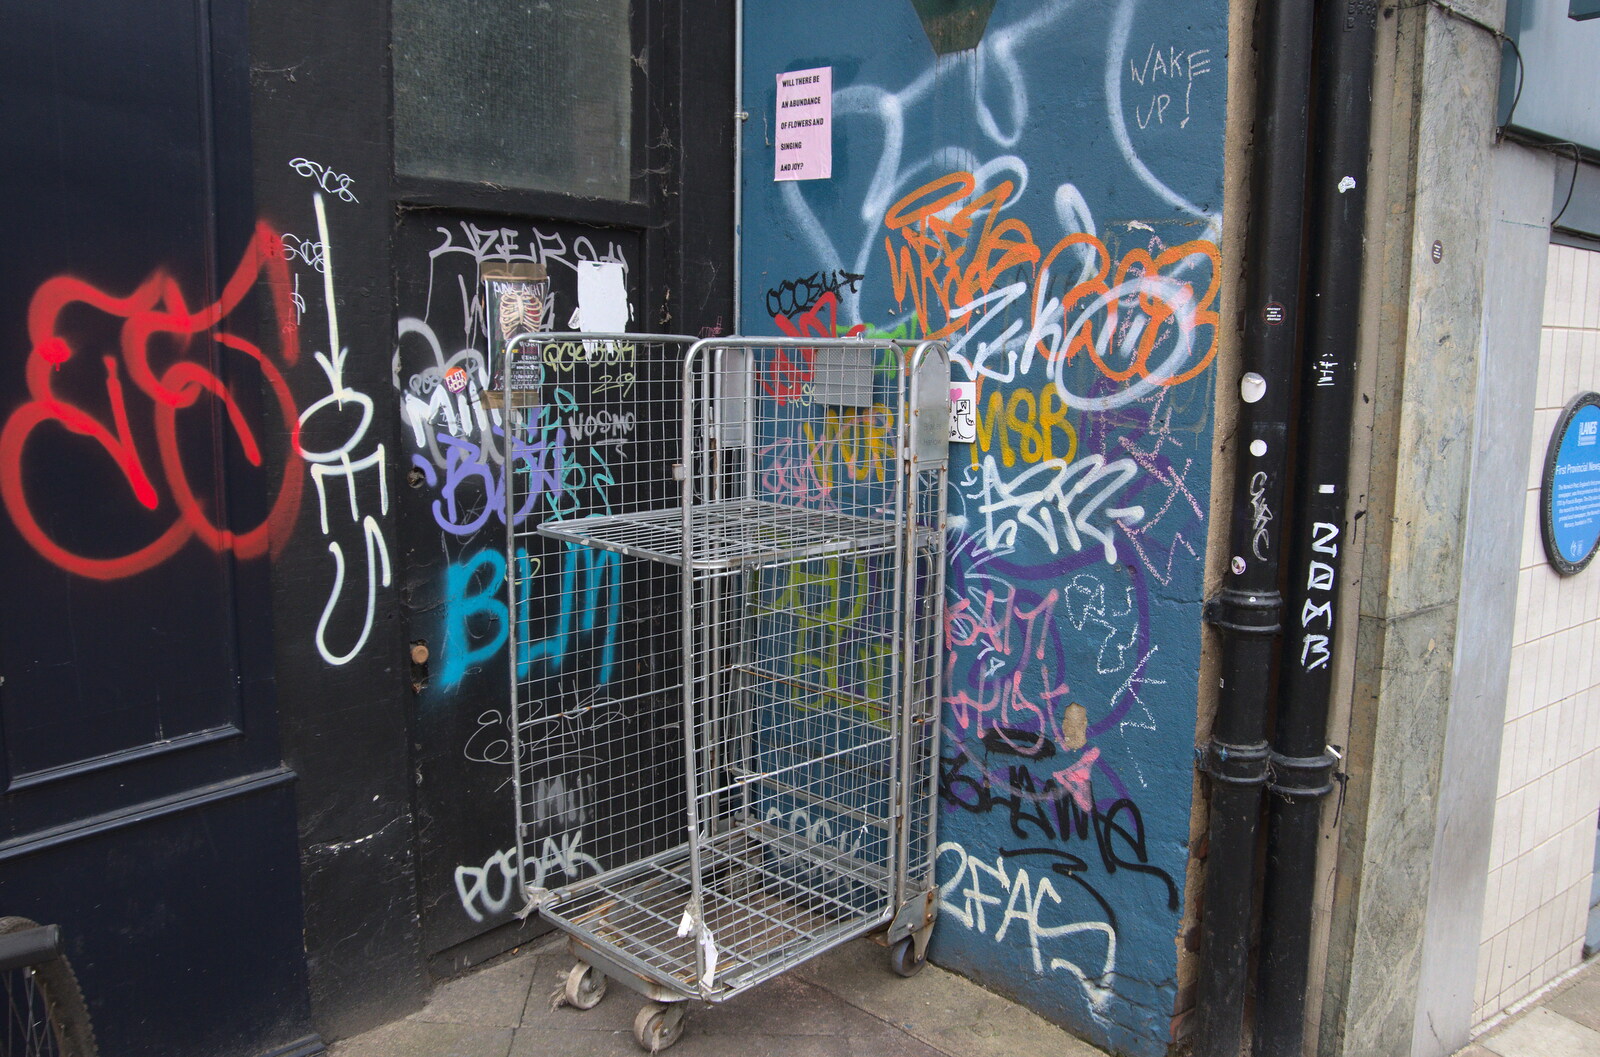 More graffiti and an abandoned trolley from The Lost Pubs of Norwich, Norfolk - 13th February 2022